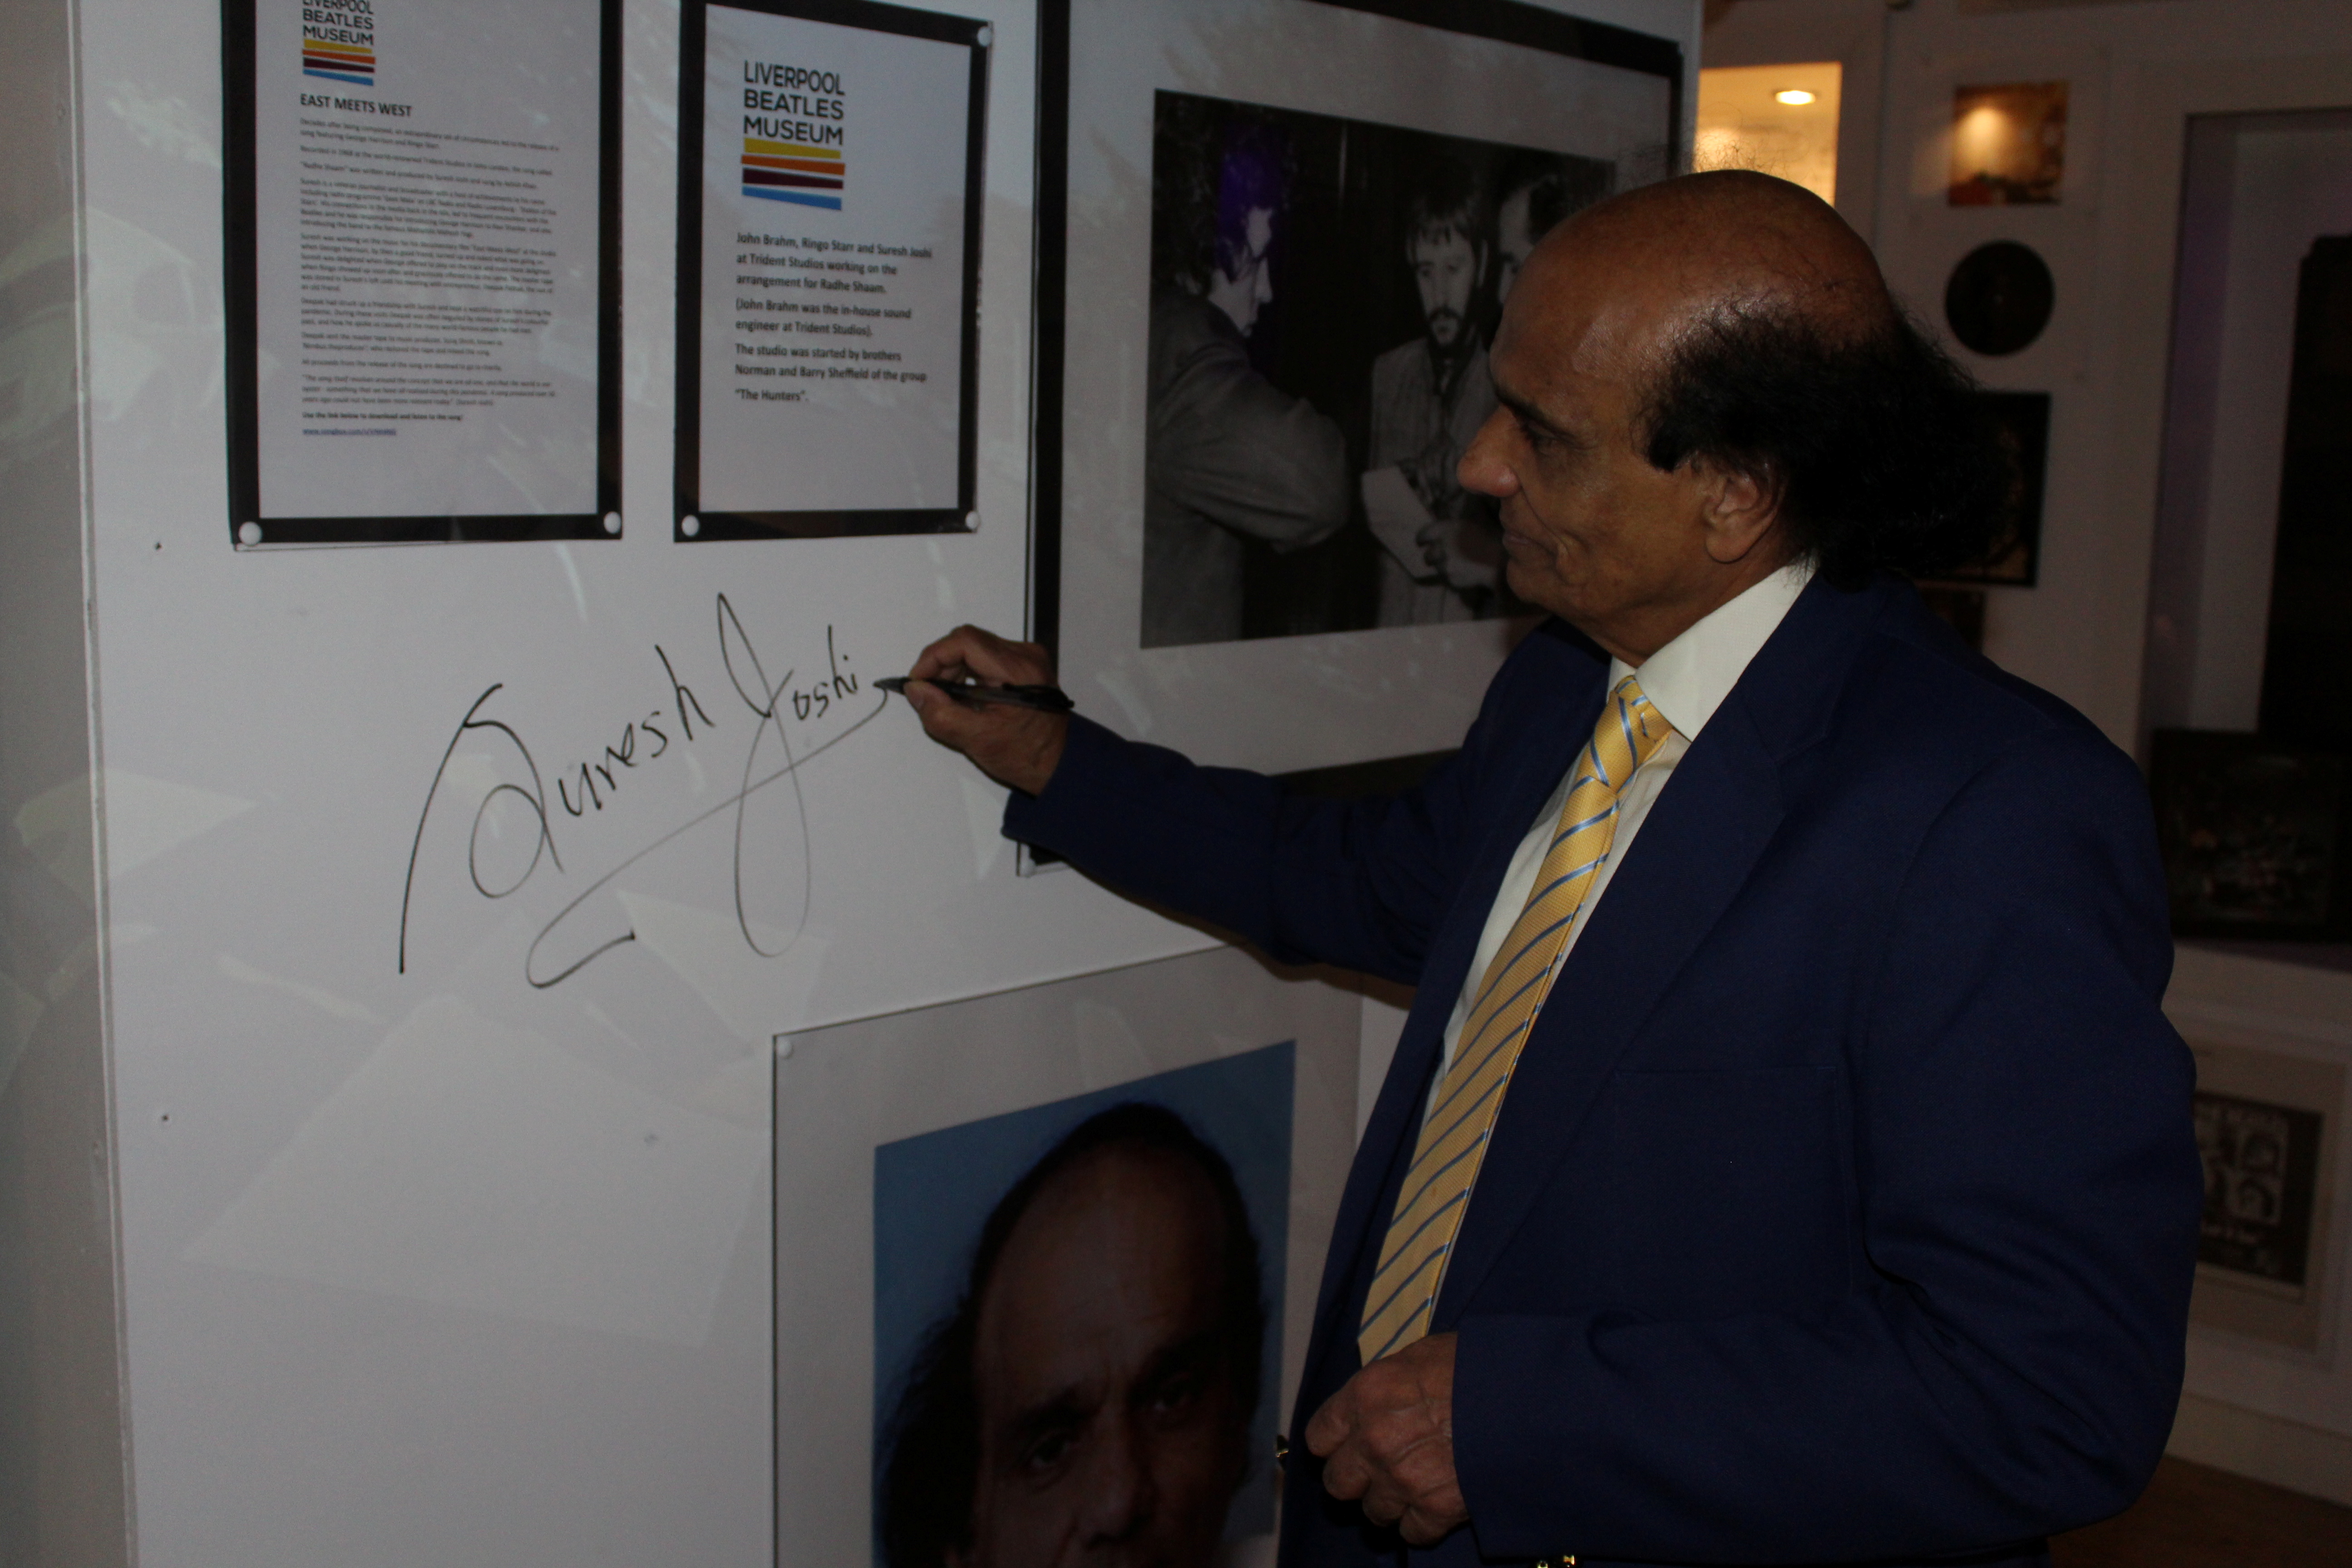 Suresh Joshi signs his name at the Liverpool Beatles Museum in Liverpool